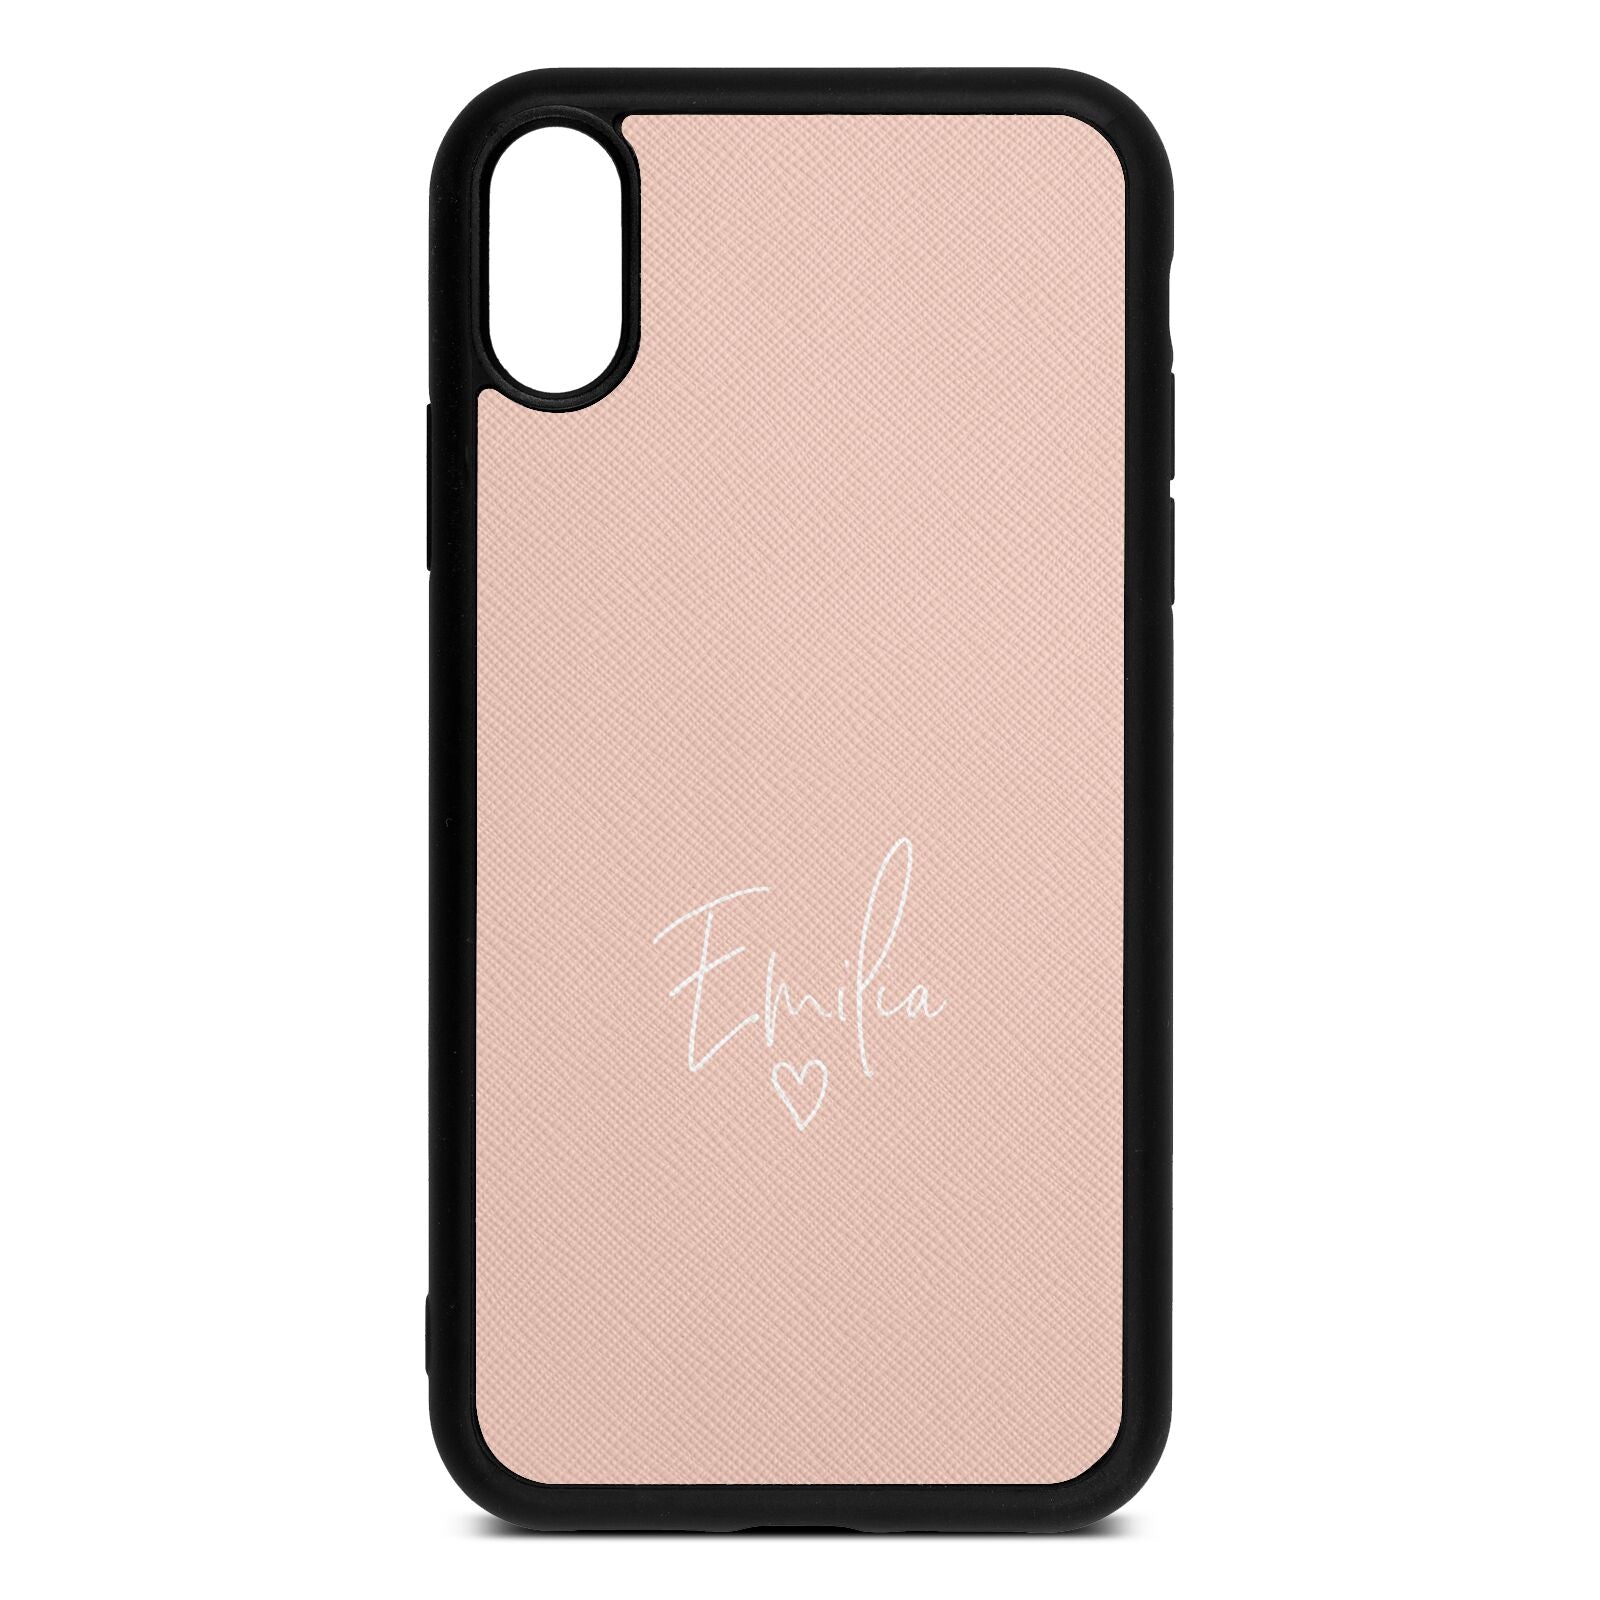 White Handwritten Name Transparent Nude Saffiano Leather iPhone Xr Case